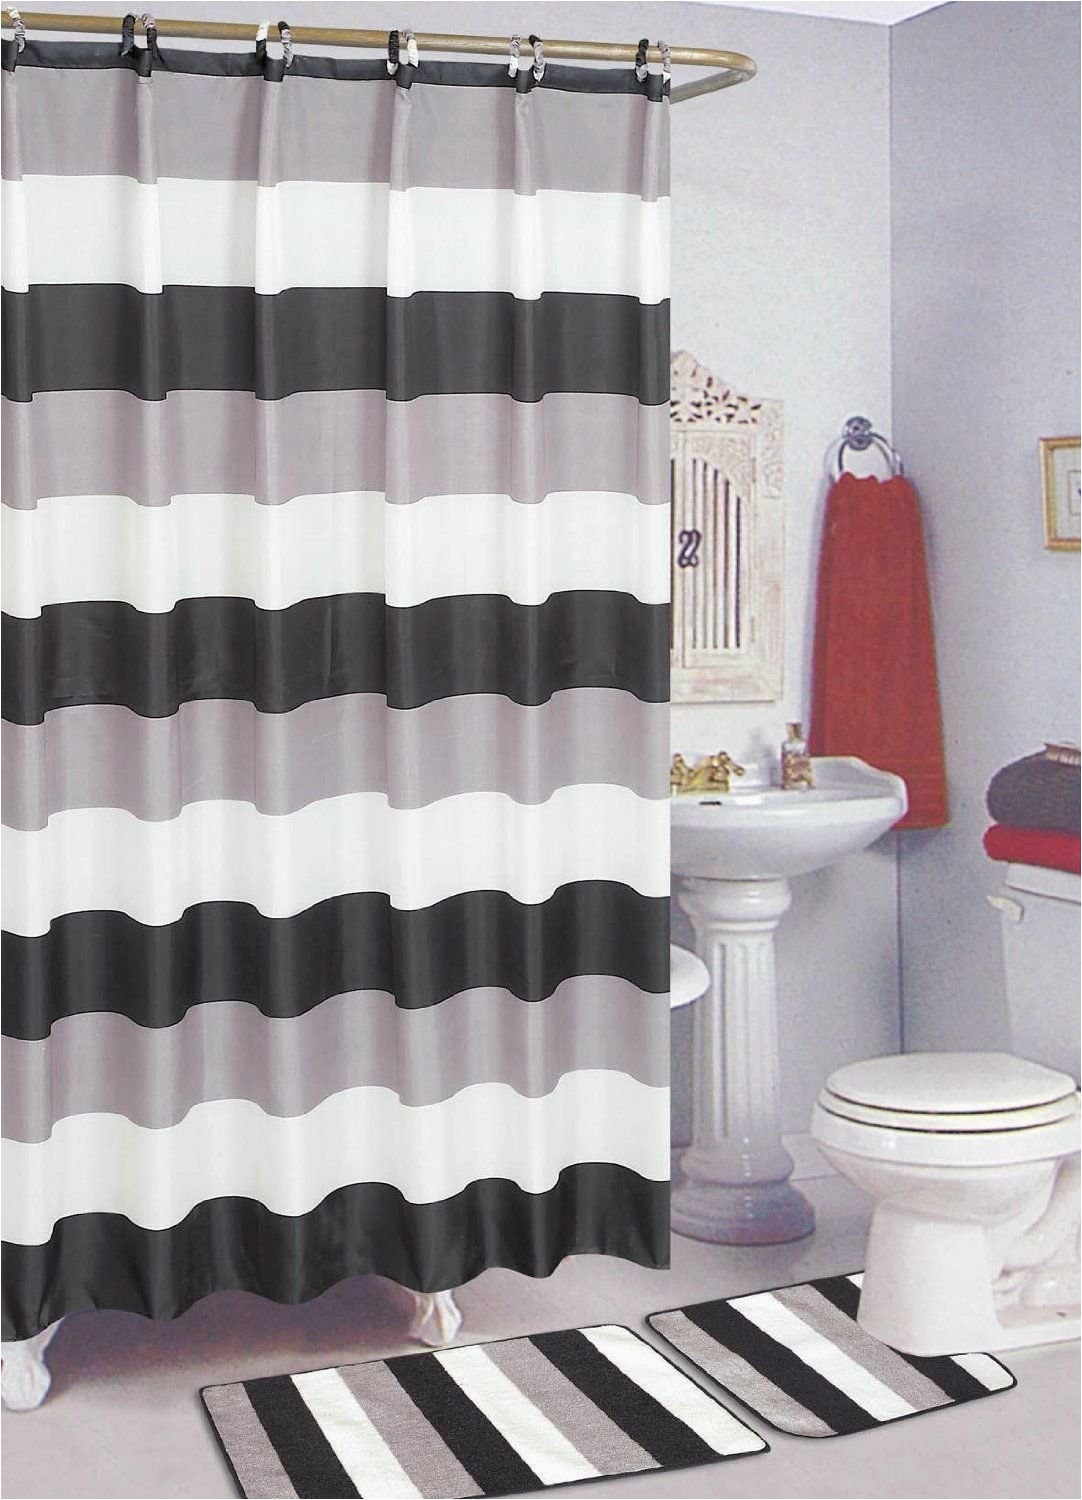 Shower Curtains with Matching Bath Rugs Empire Black & White 15 Piece Bathroom Set Bath Rugs Shower Curtain & Rings